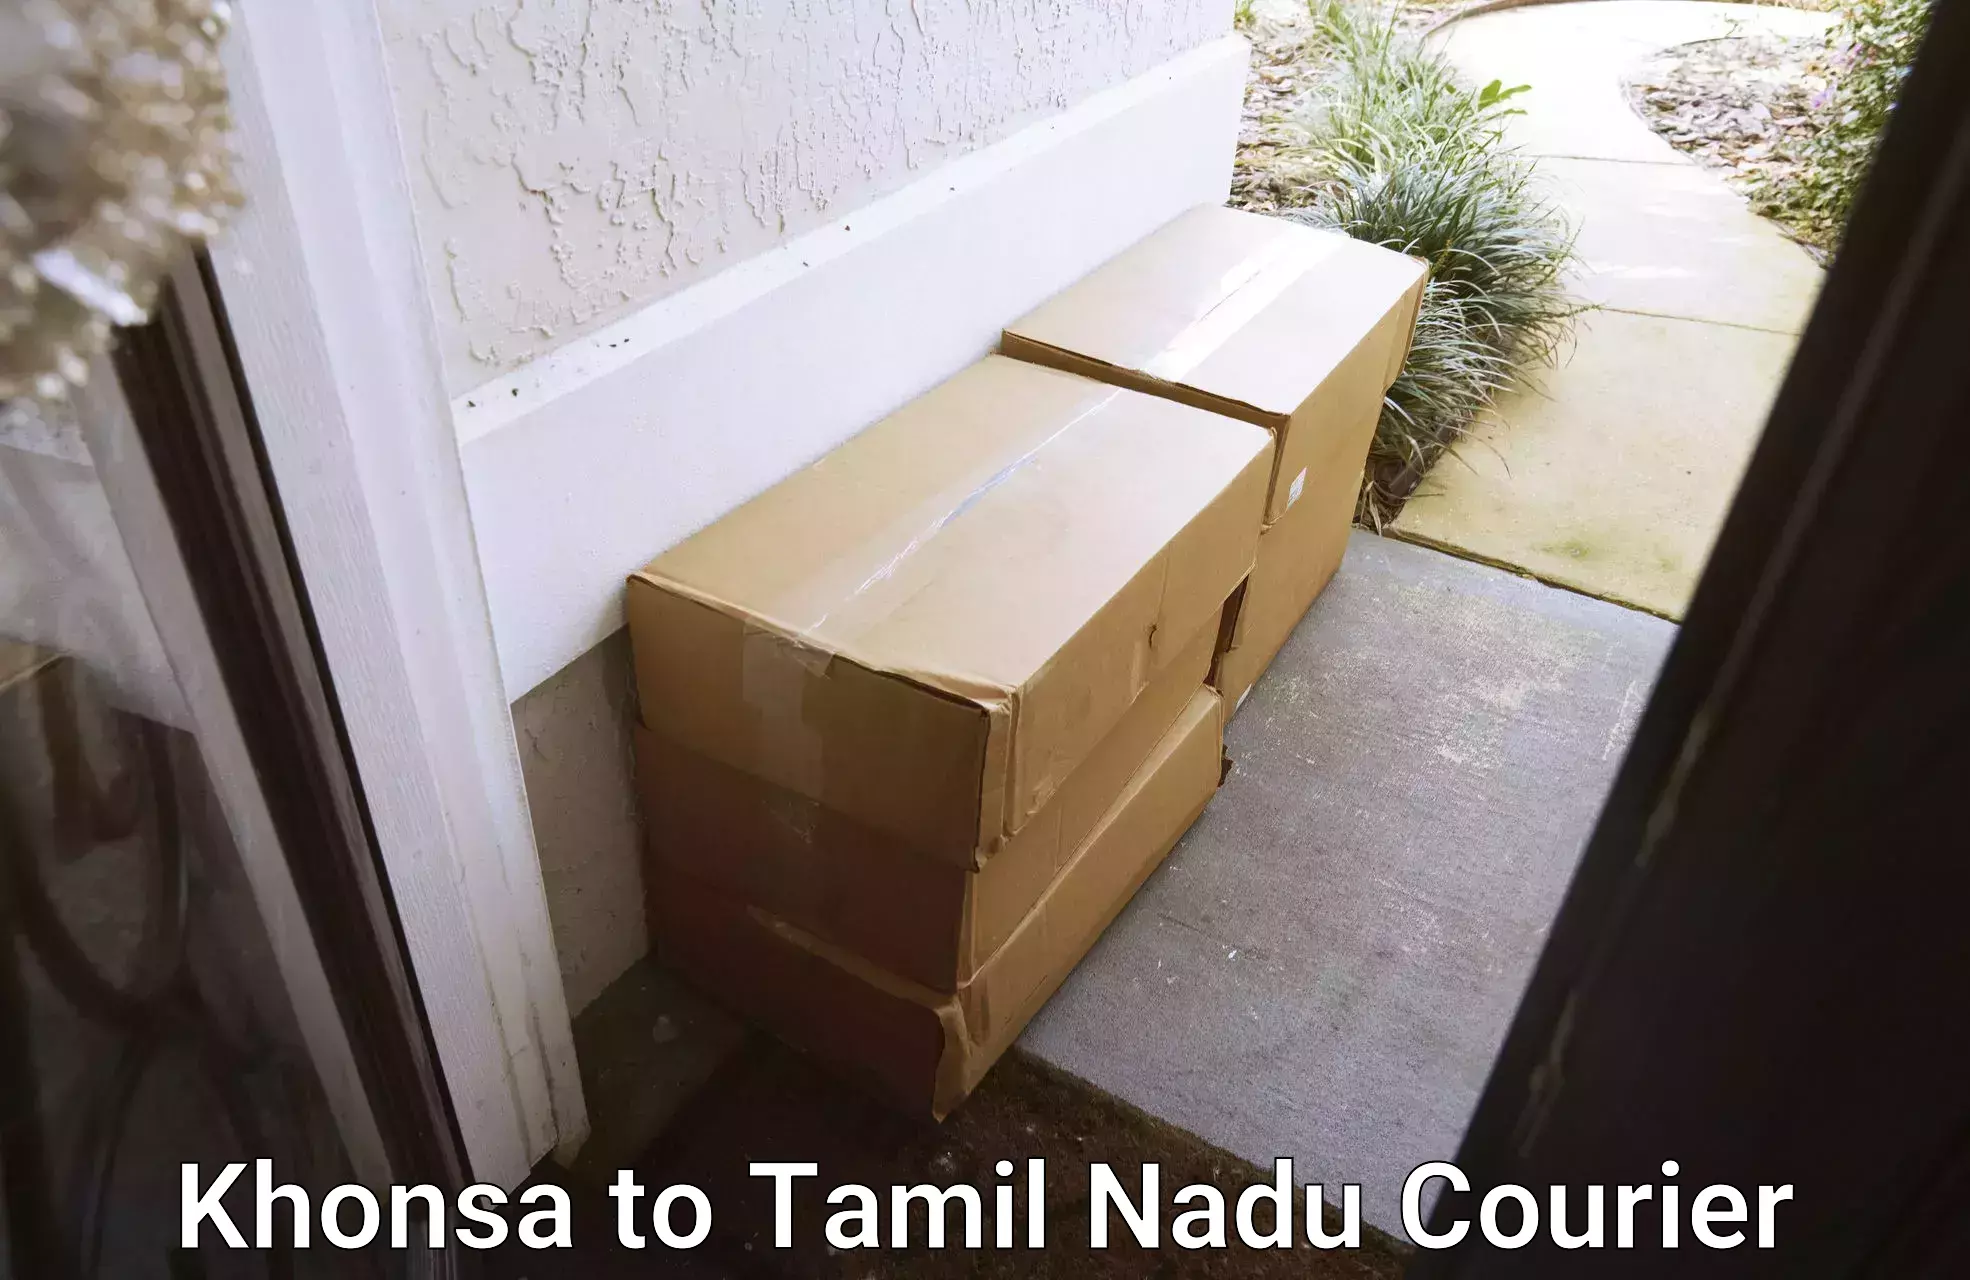 Large package courier in Khonsa to Thiruvadanai